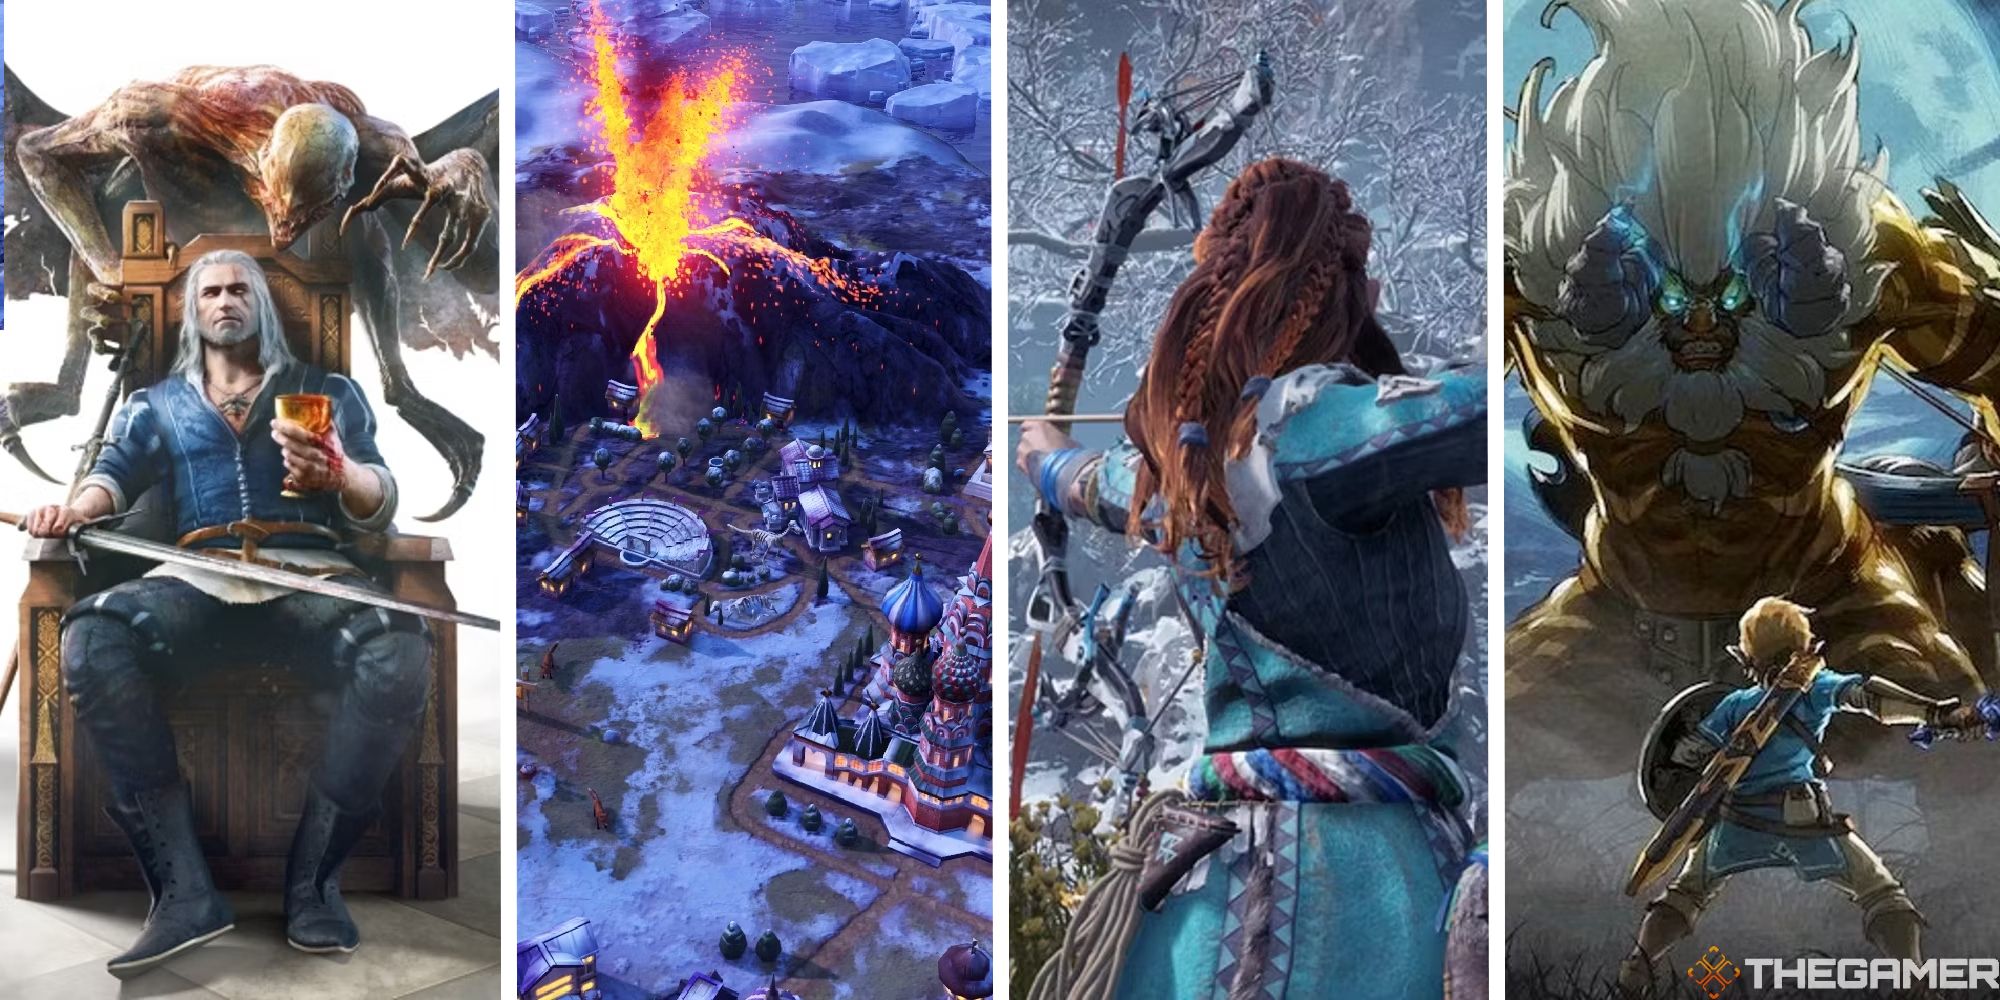 split image showing the witcher 3, civ 6: gathering storm, horizon hero dawn, and breath of the wild dlc